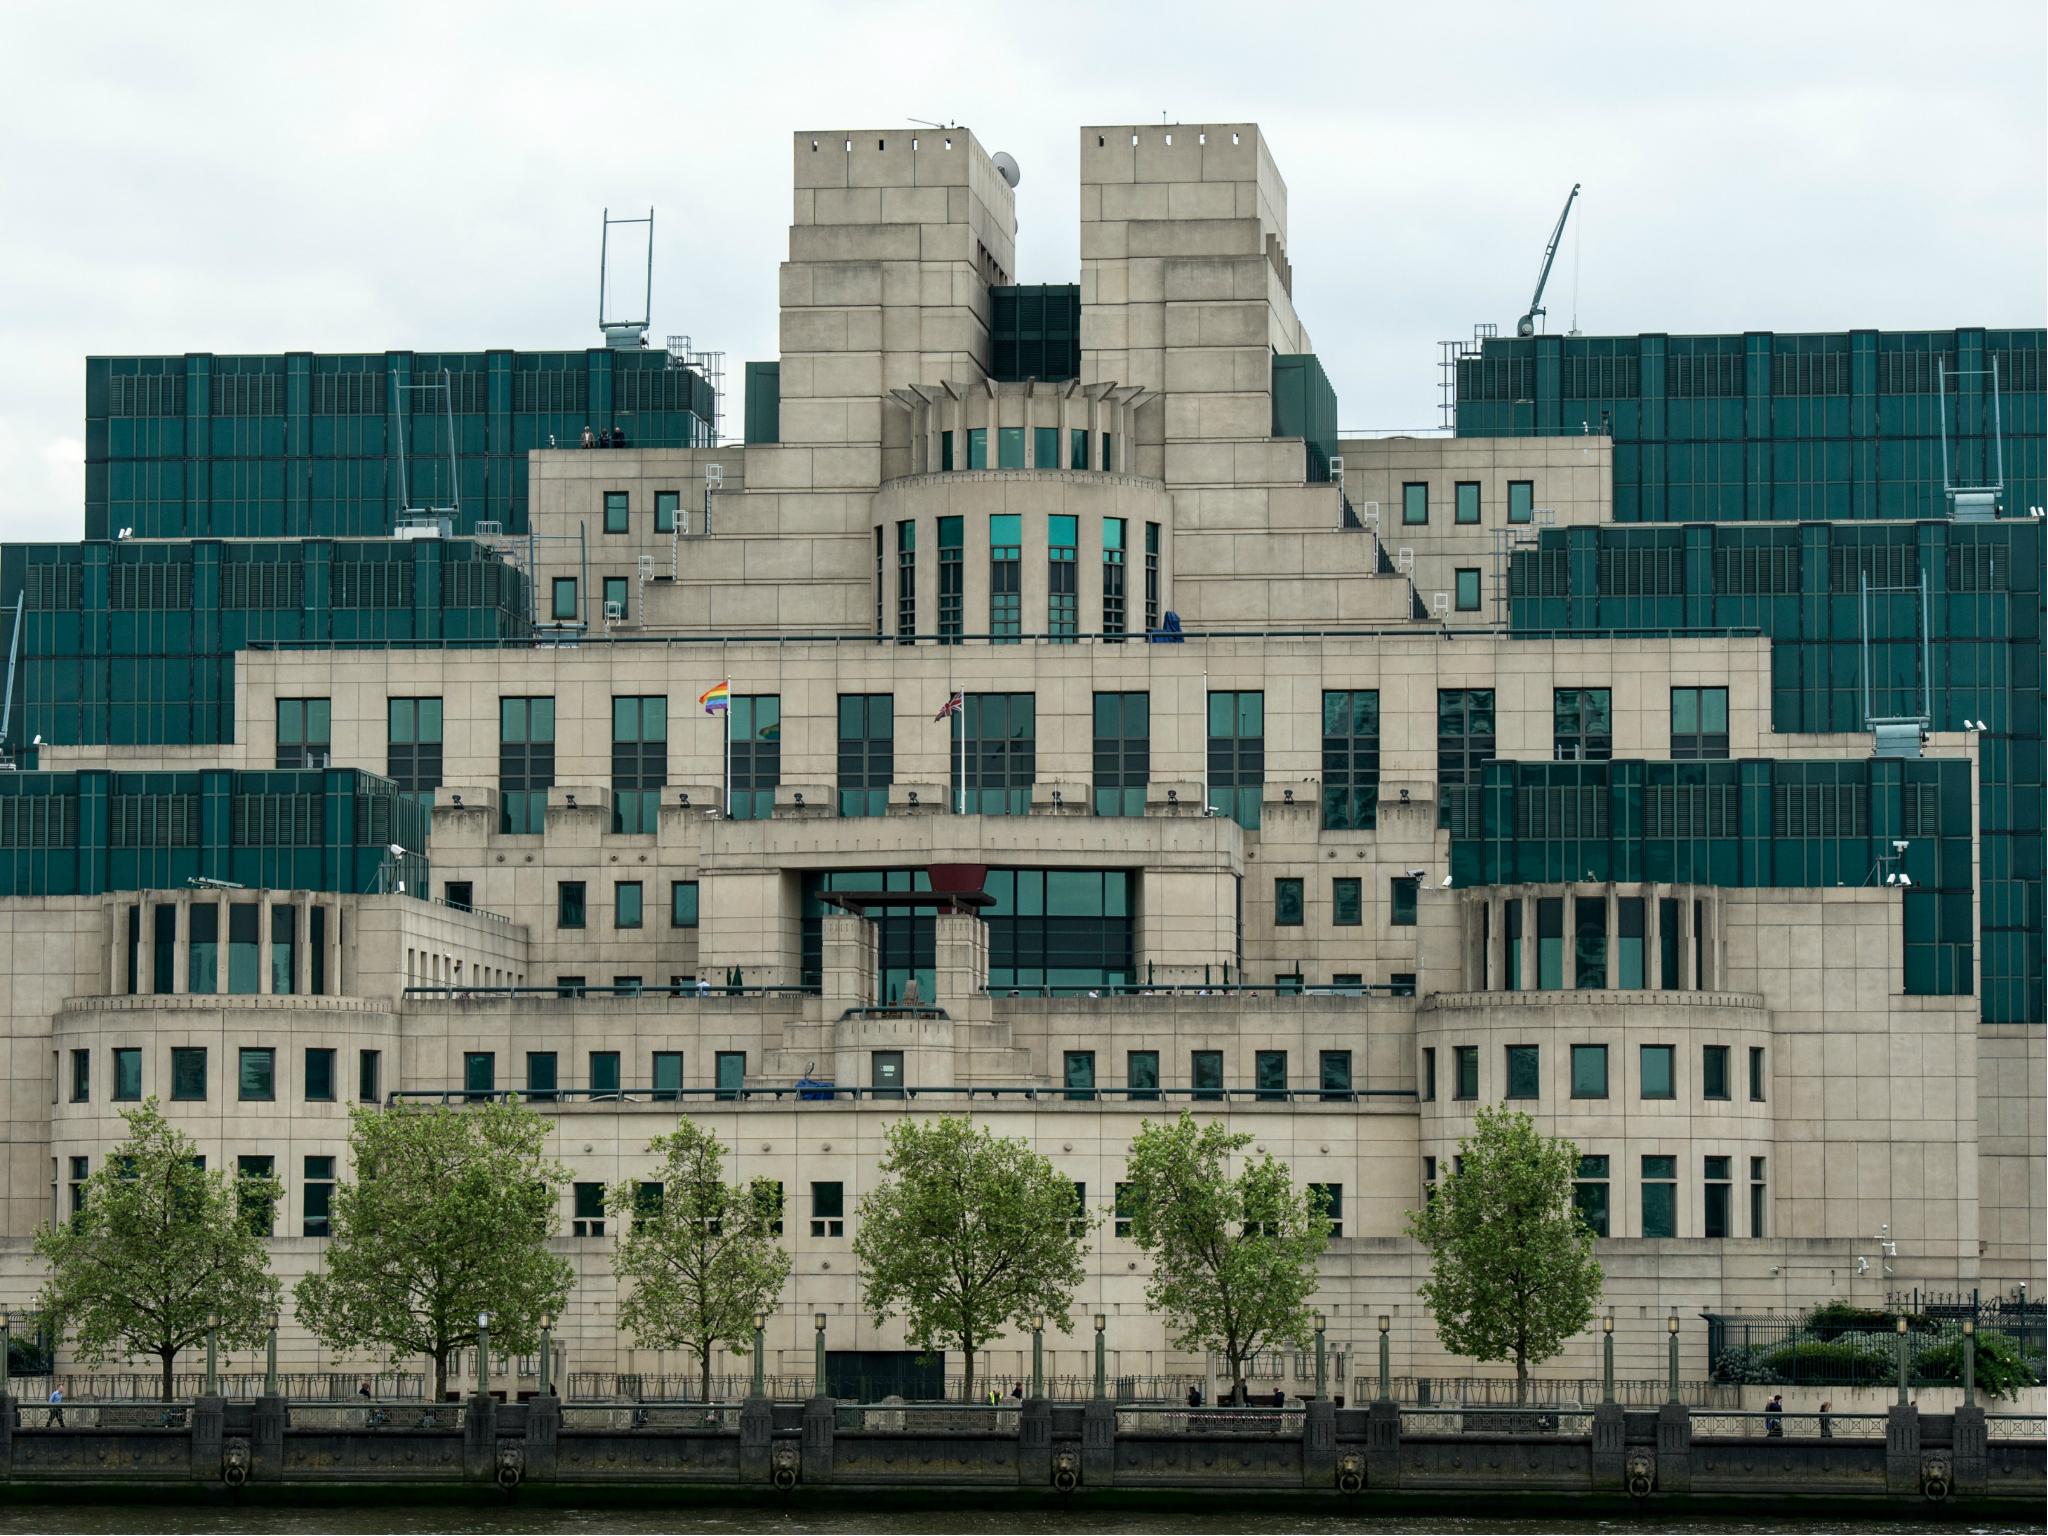 MI6 building in London. Christopher Steele, a former MI6 spy stationed in Moscow, authored the now infamous dossier regarding Donald Trump and Russia.